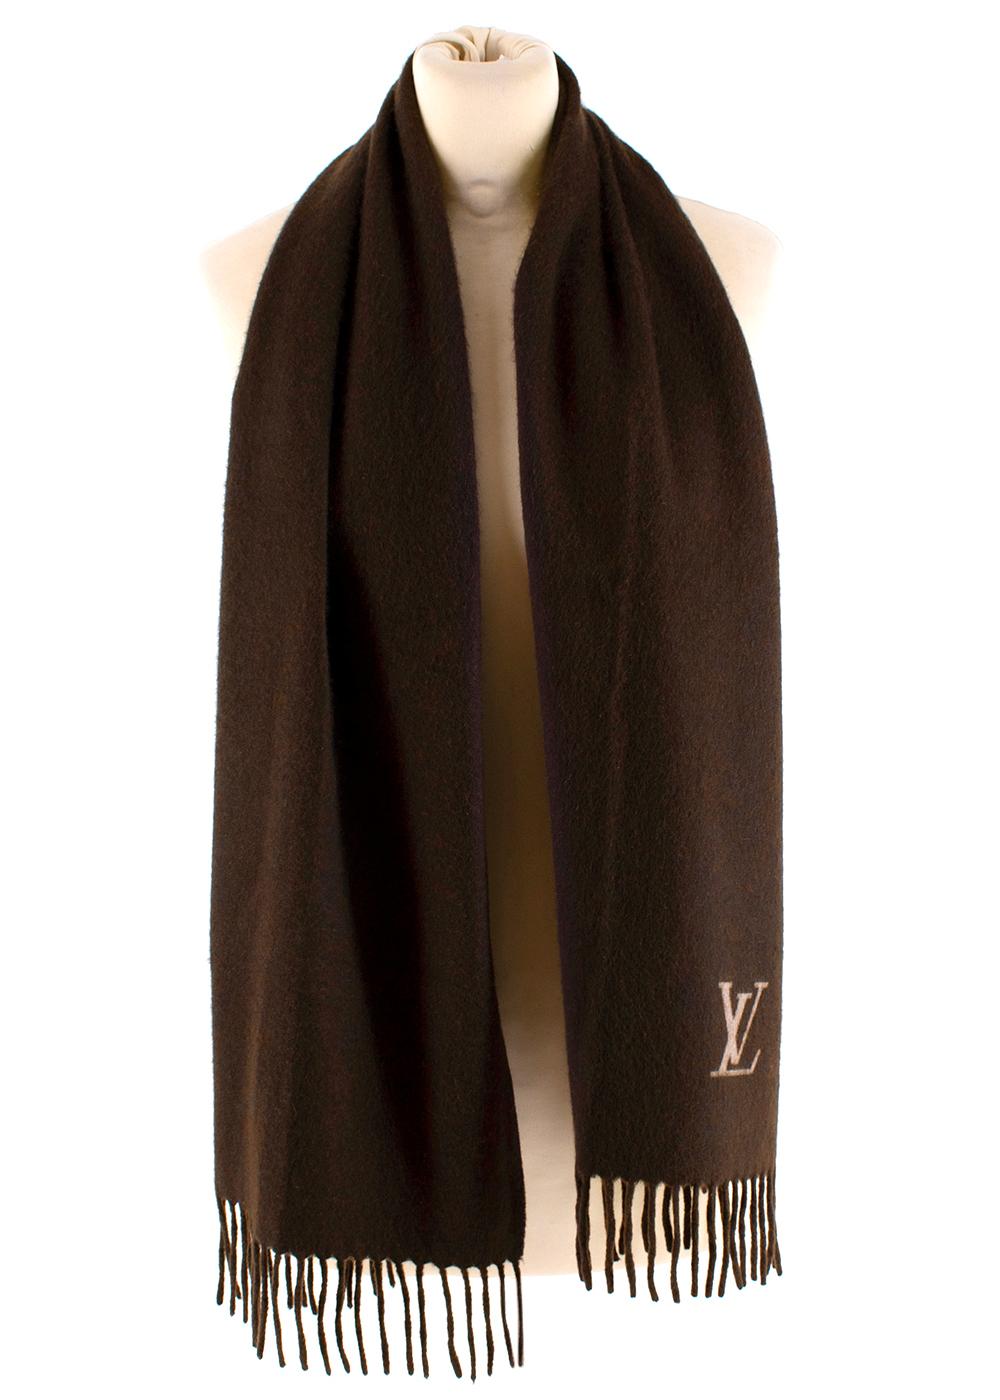 Louis Vuitton Brown Cashmere Fringed Scarf

- Luxurious super soft cashmere texture 
- Neutral brown hue 
- Classic style 
- Fringed details to the edges 
- Subtle LV logo detail to the corner 
- Timeless elegant design 

Materials:
100% cashmere